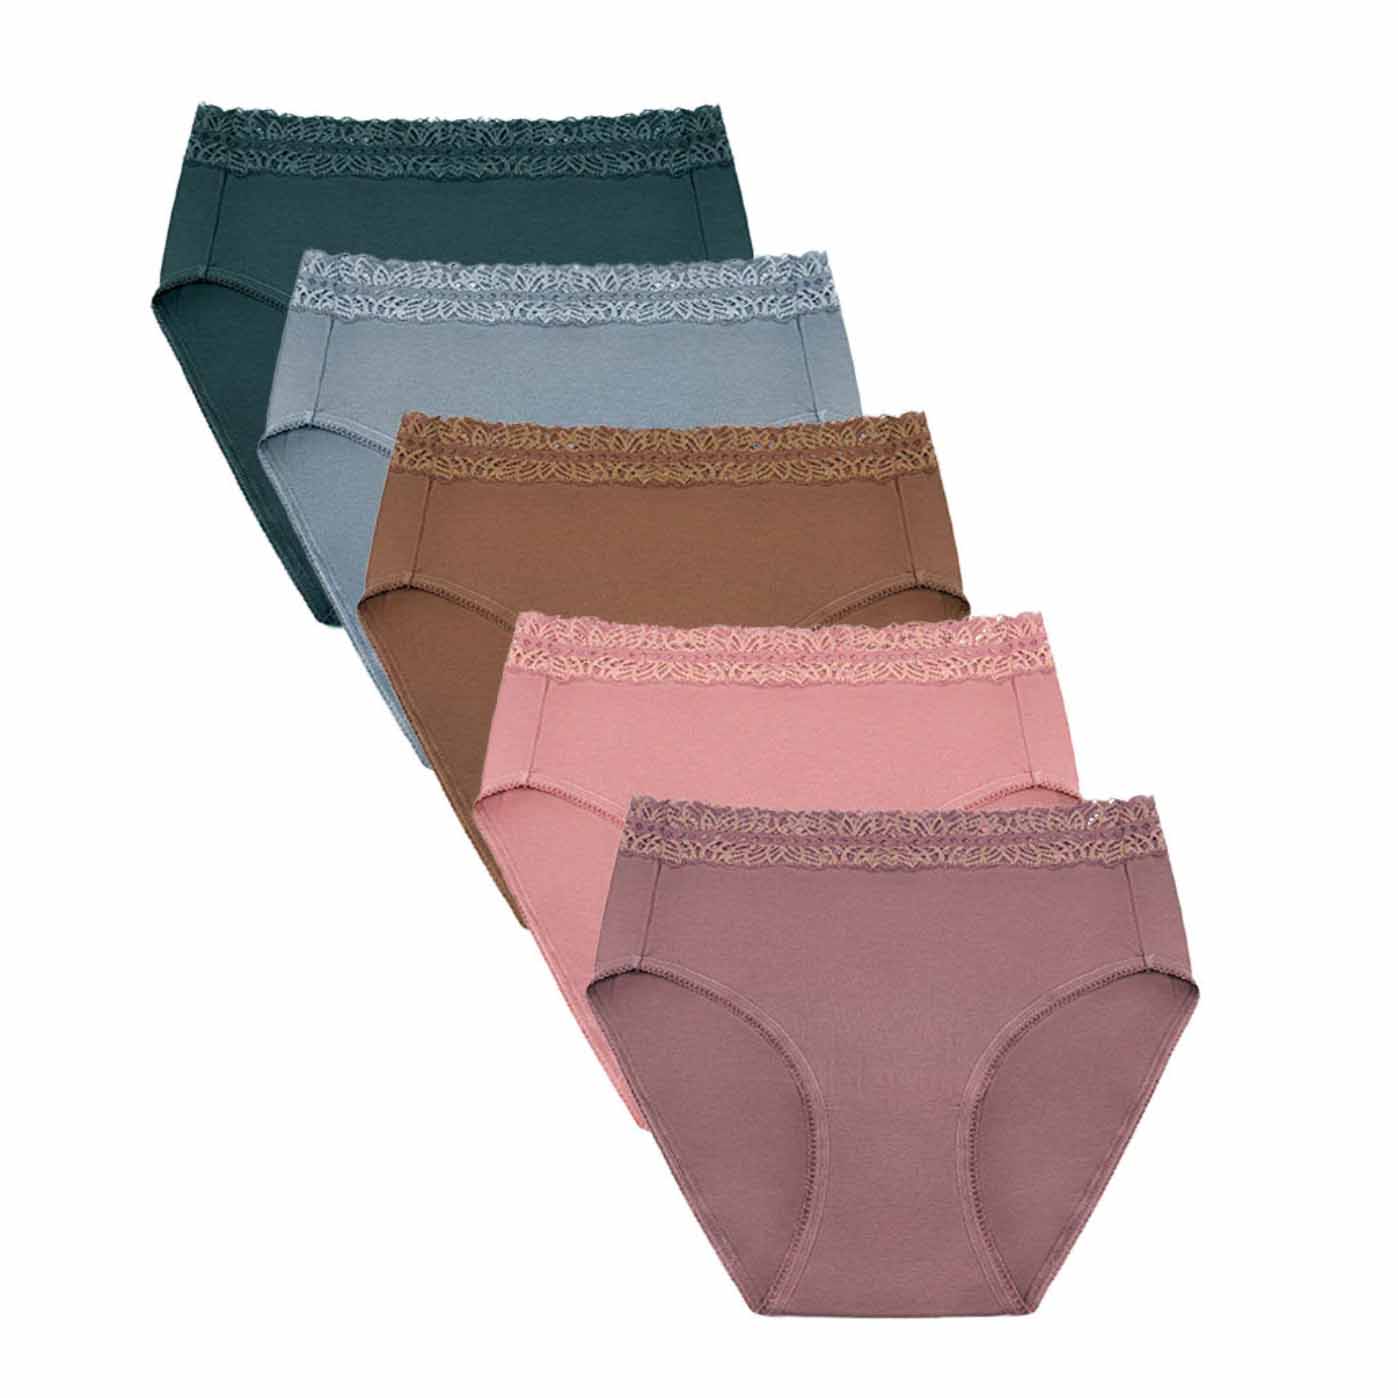 High-waisted postpartum undies in different colors